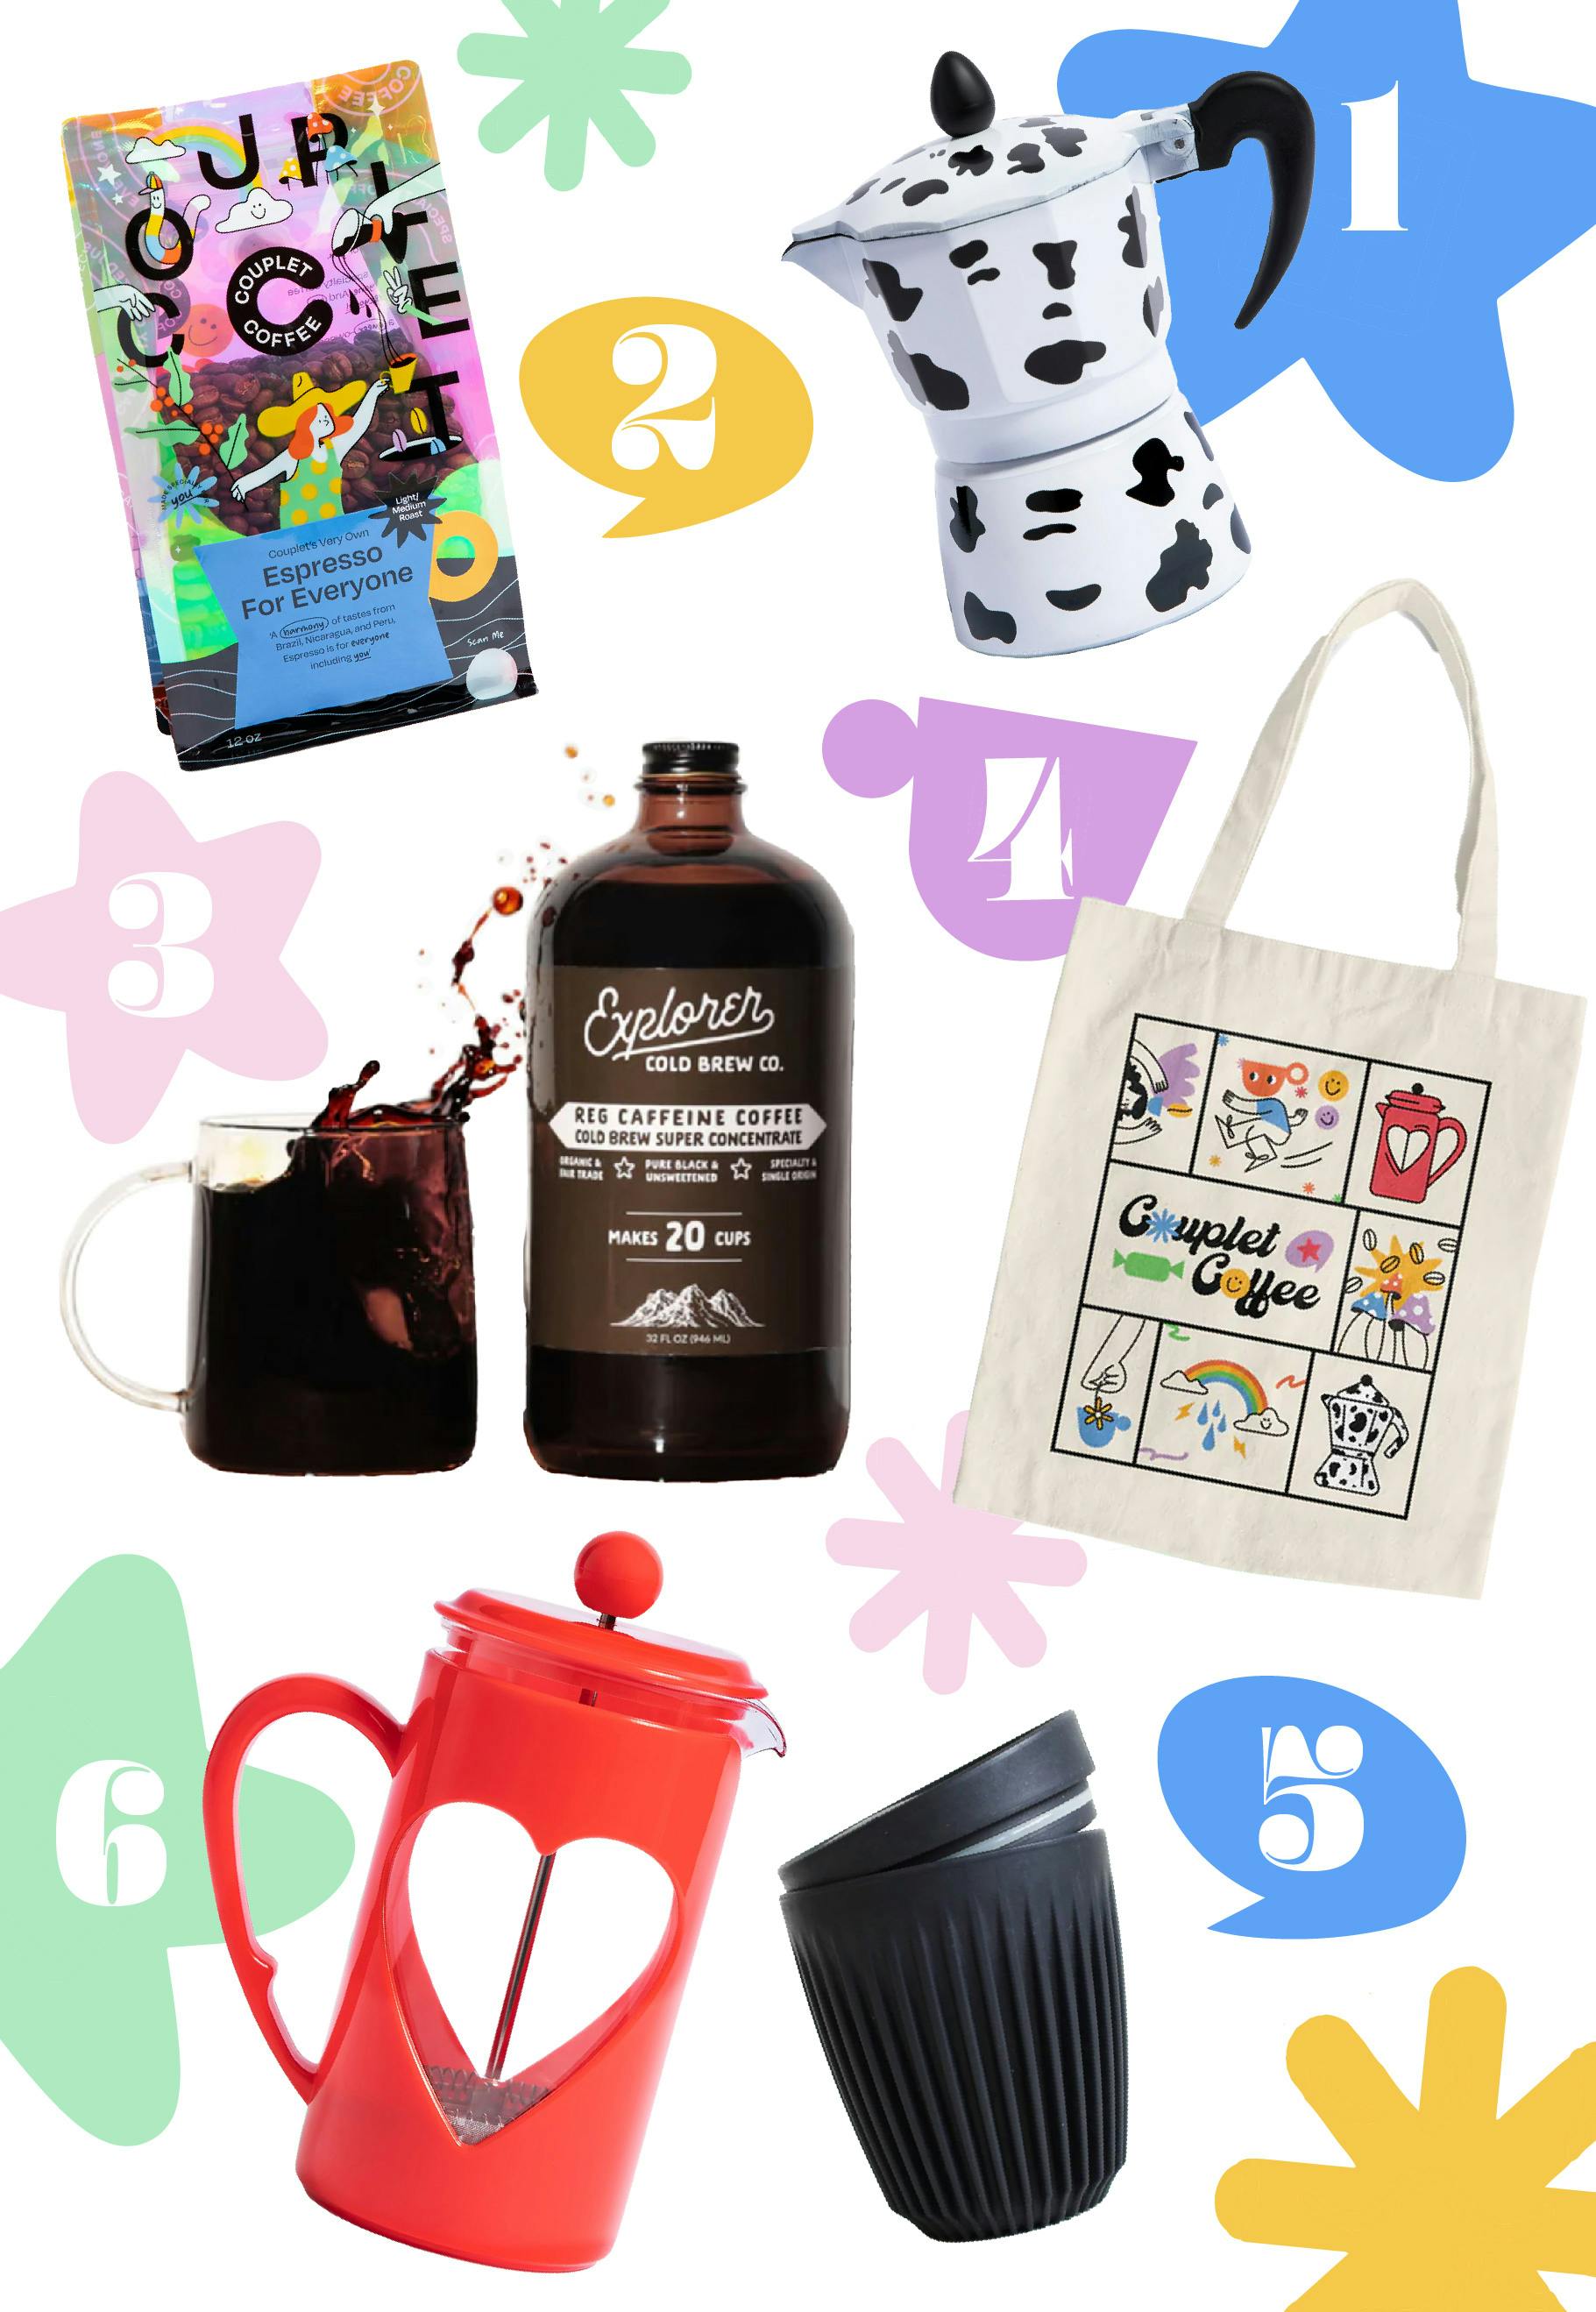 Great Gifts for Coffee Lovers